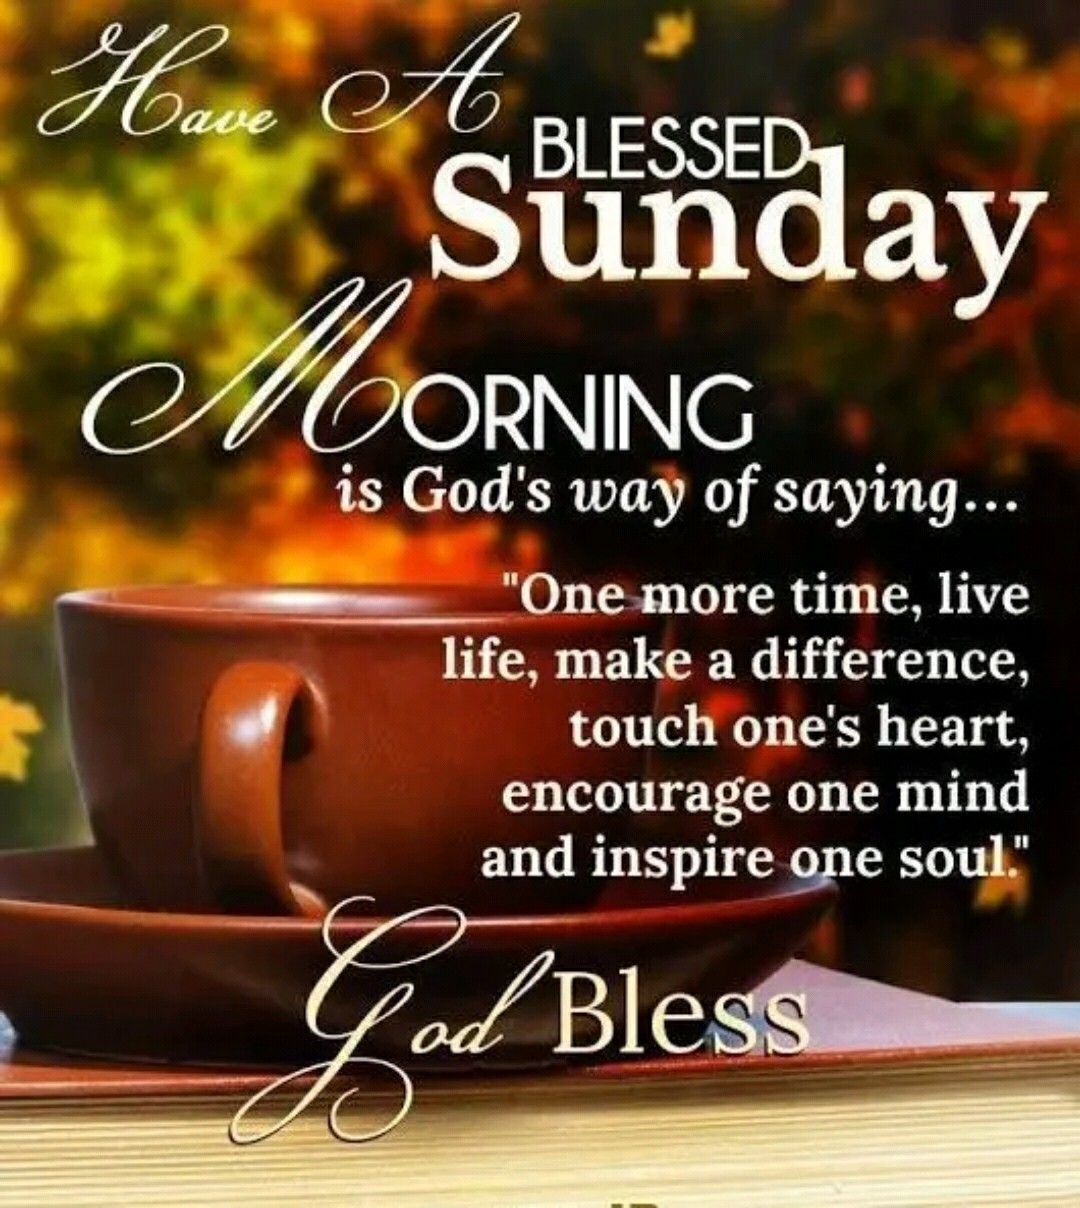 Inspirational Good Morning Sunday Blessings Images